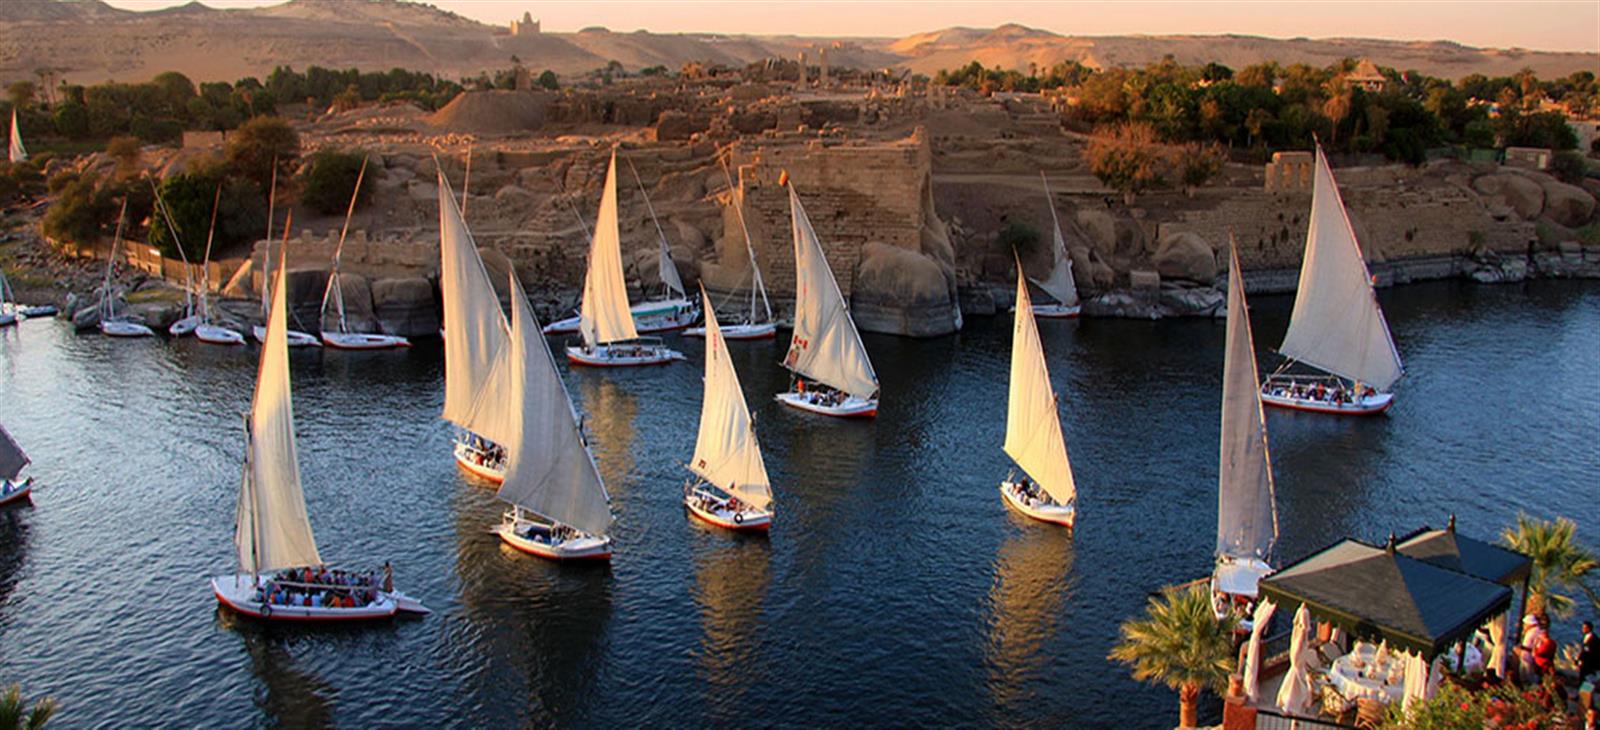 10 days ancient egypt holiday packages